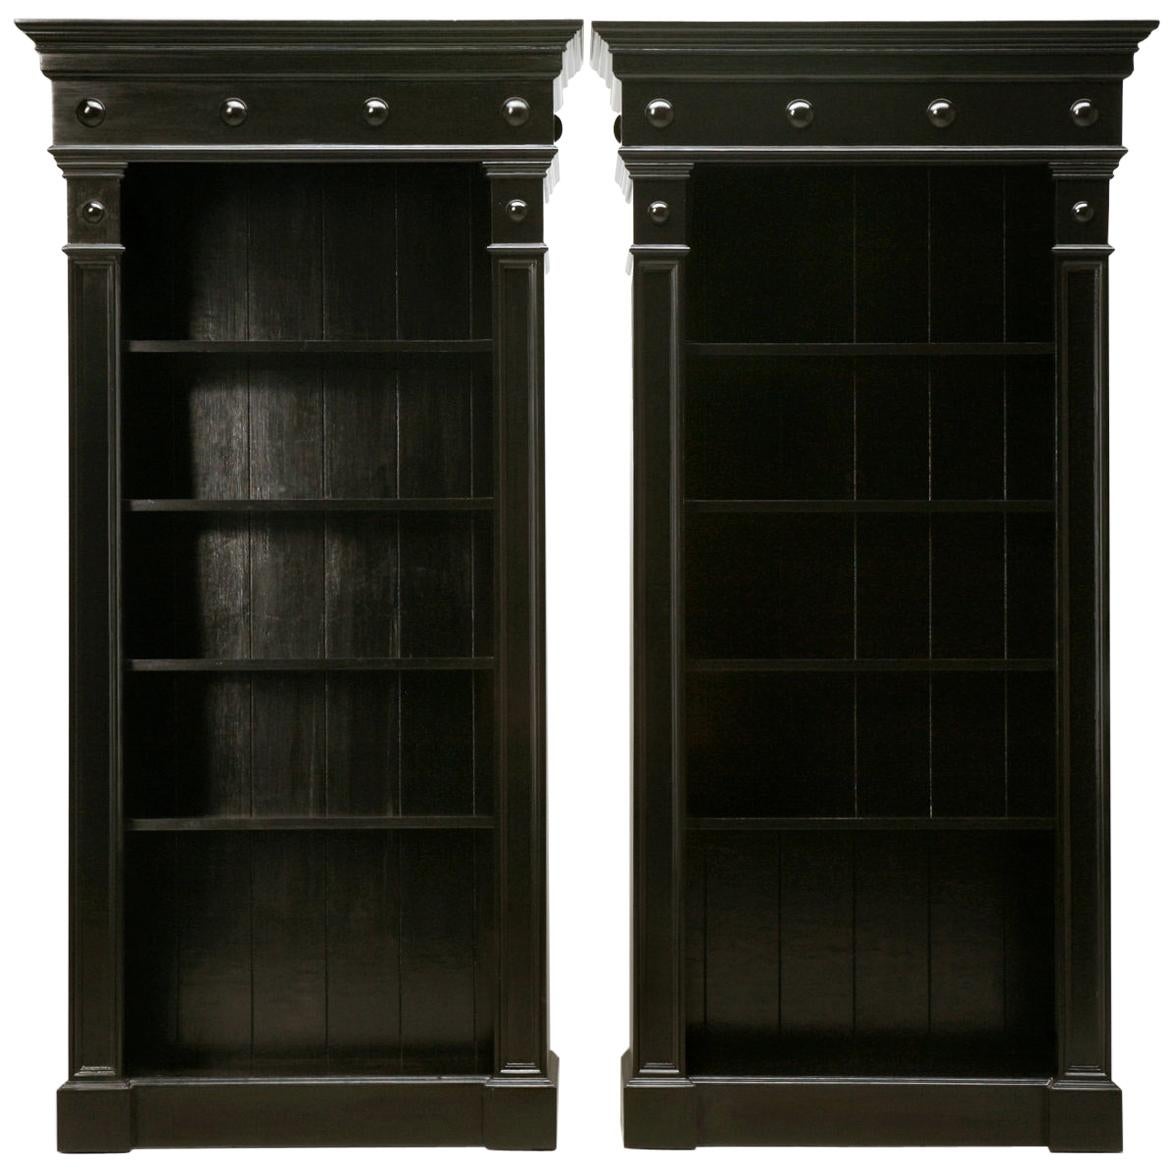 Pair of Custom Bookcases Black Hand Painted Finish in Any Dimension or Finish